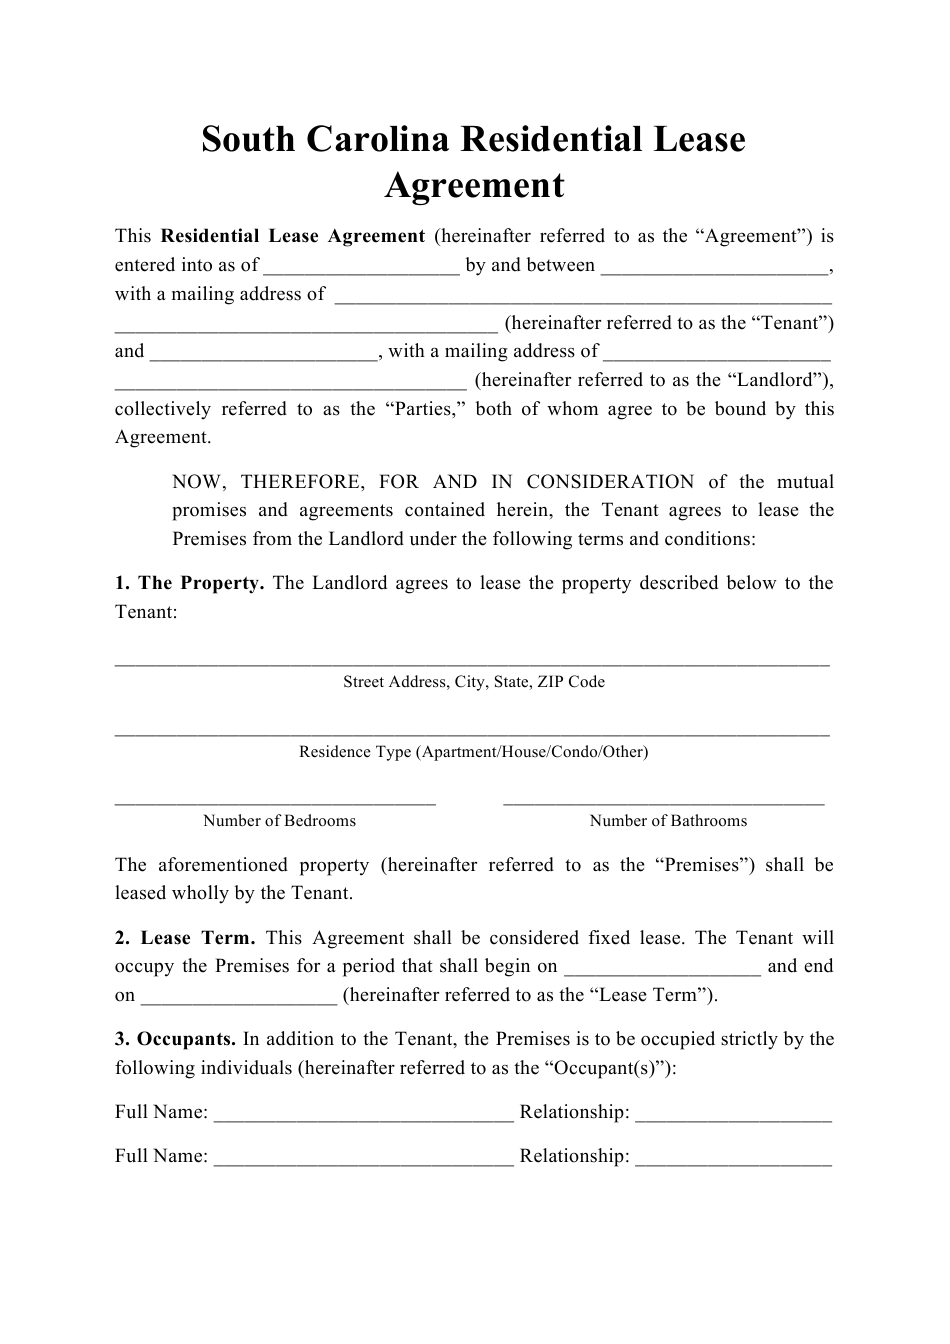 South Carolina Residential Lease Agreement Template Download Printable 